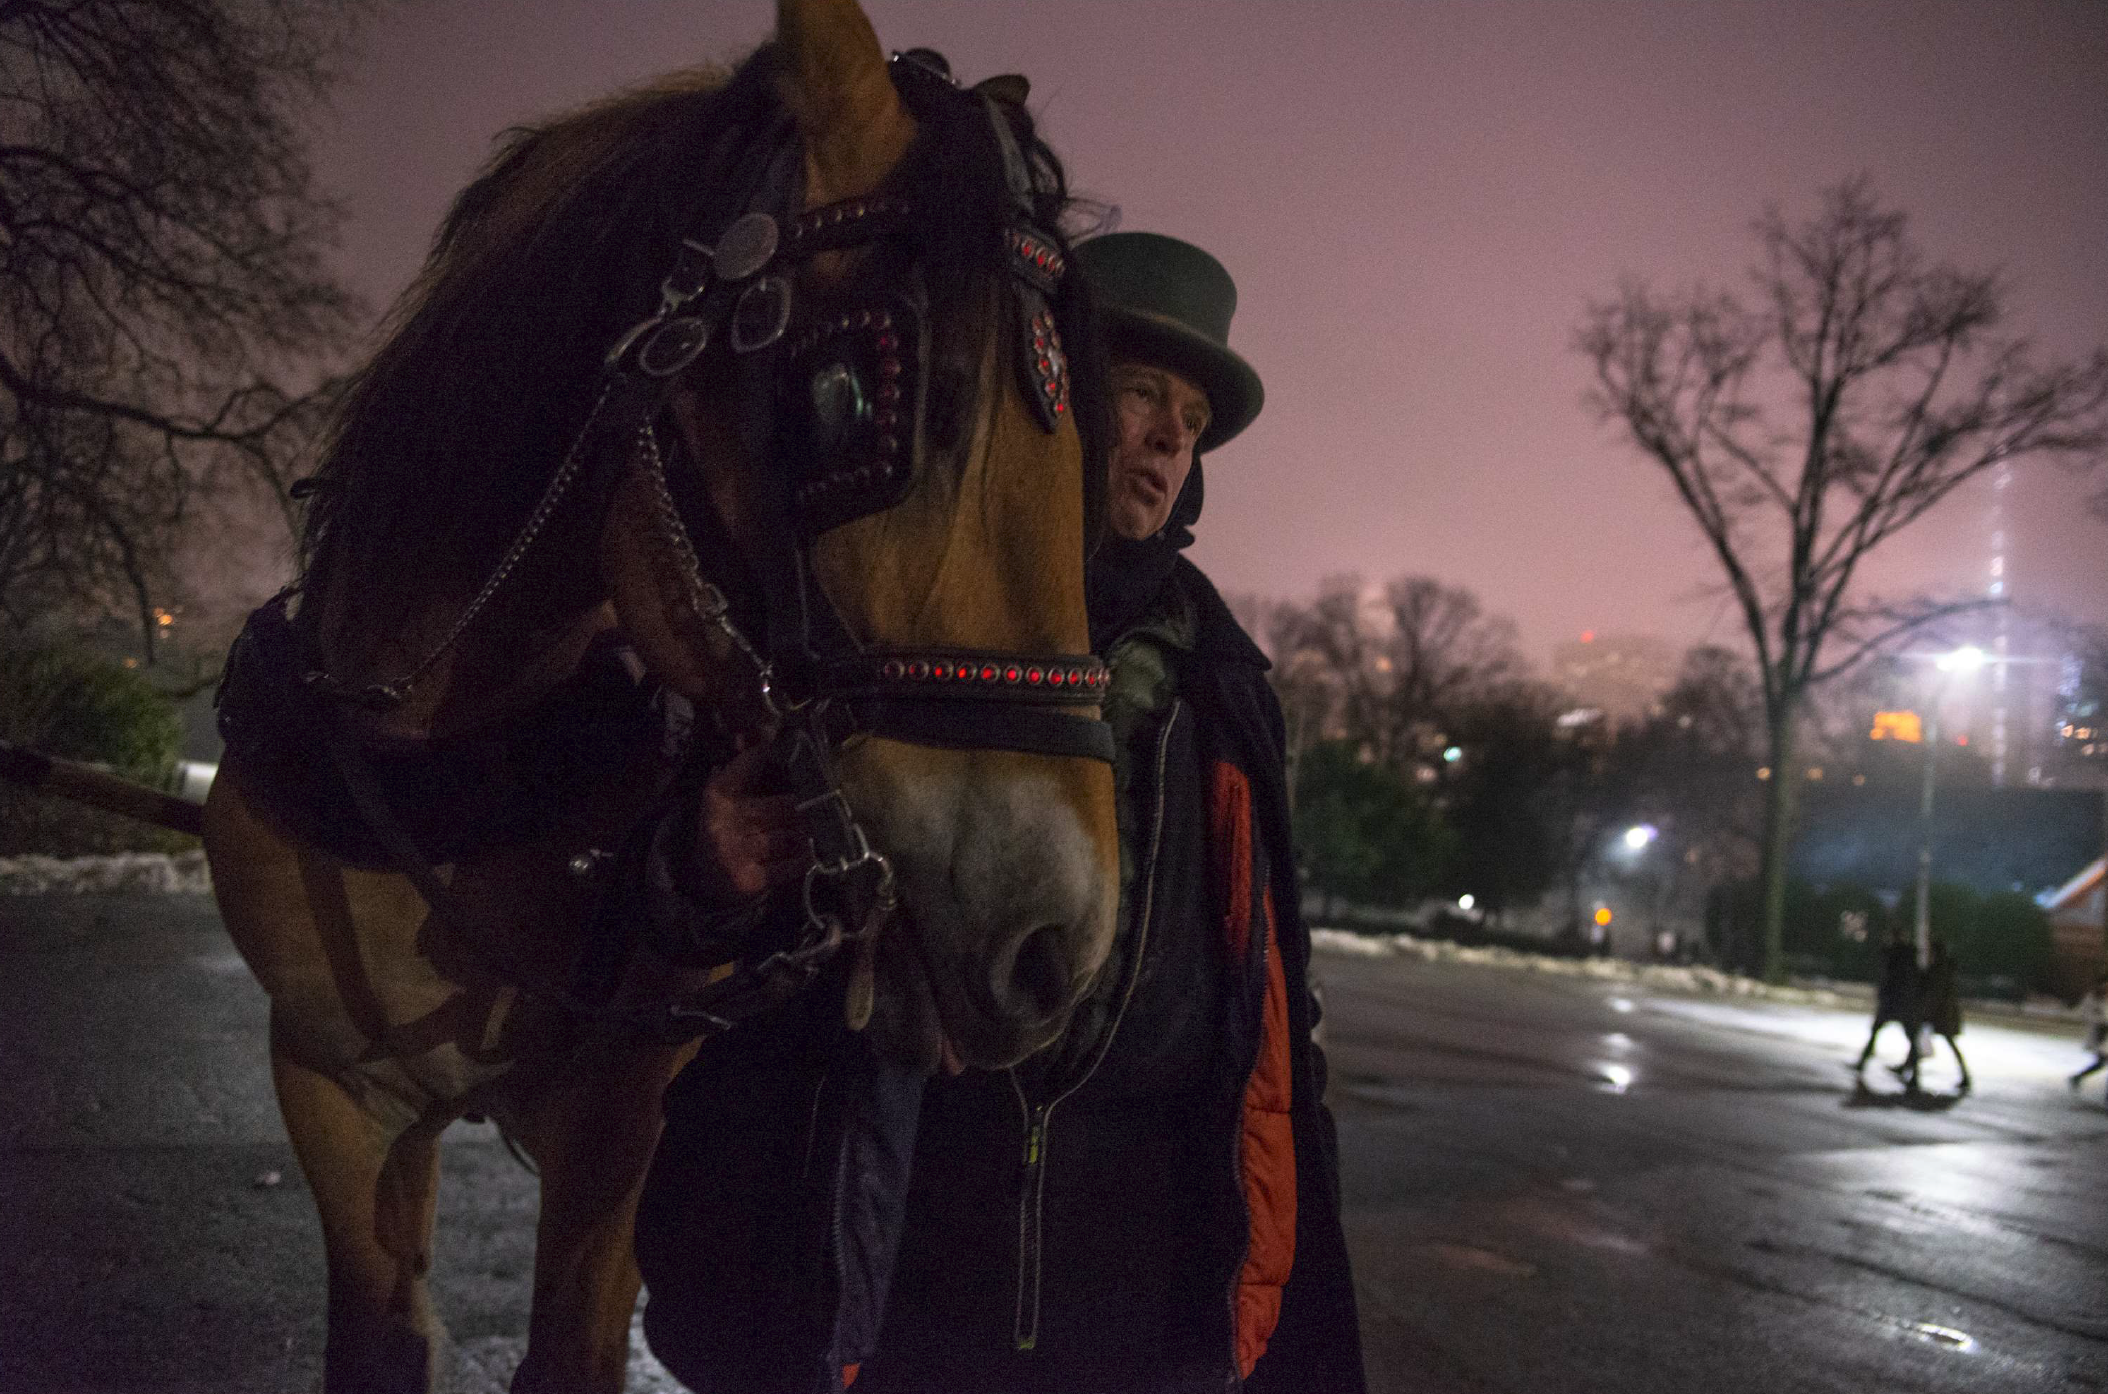  Ariel Fintzi and his horse Whiskey wait for their next ride in front of Tavern on the Green restaurant in Central Park, New York, March 2019. 